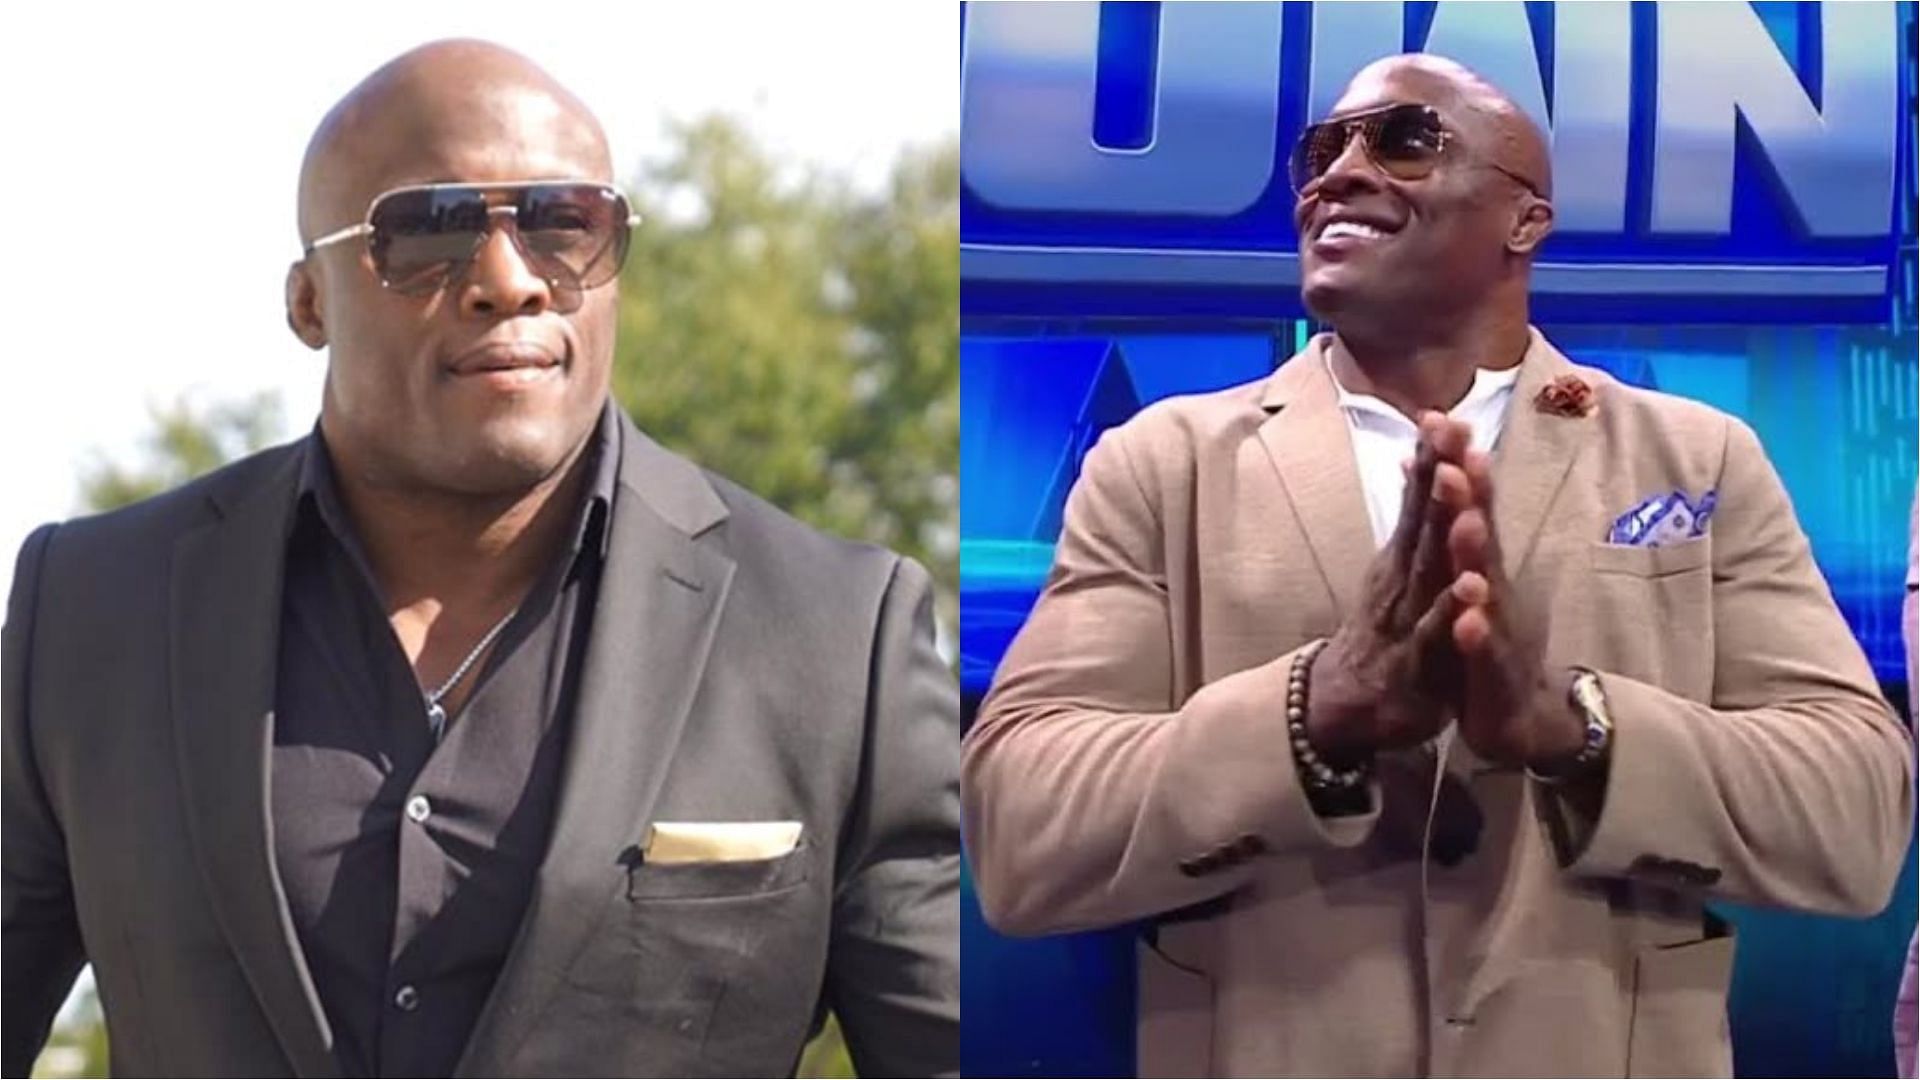 Bobby Lashley could bring back a top name to WWE.